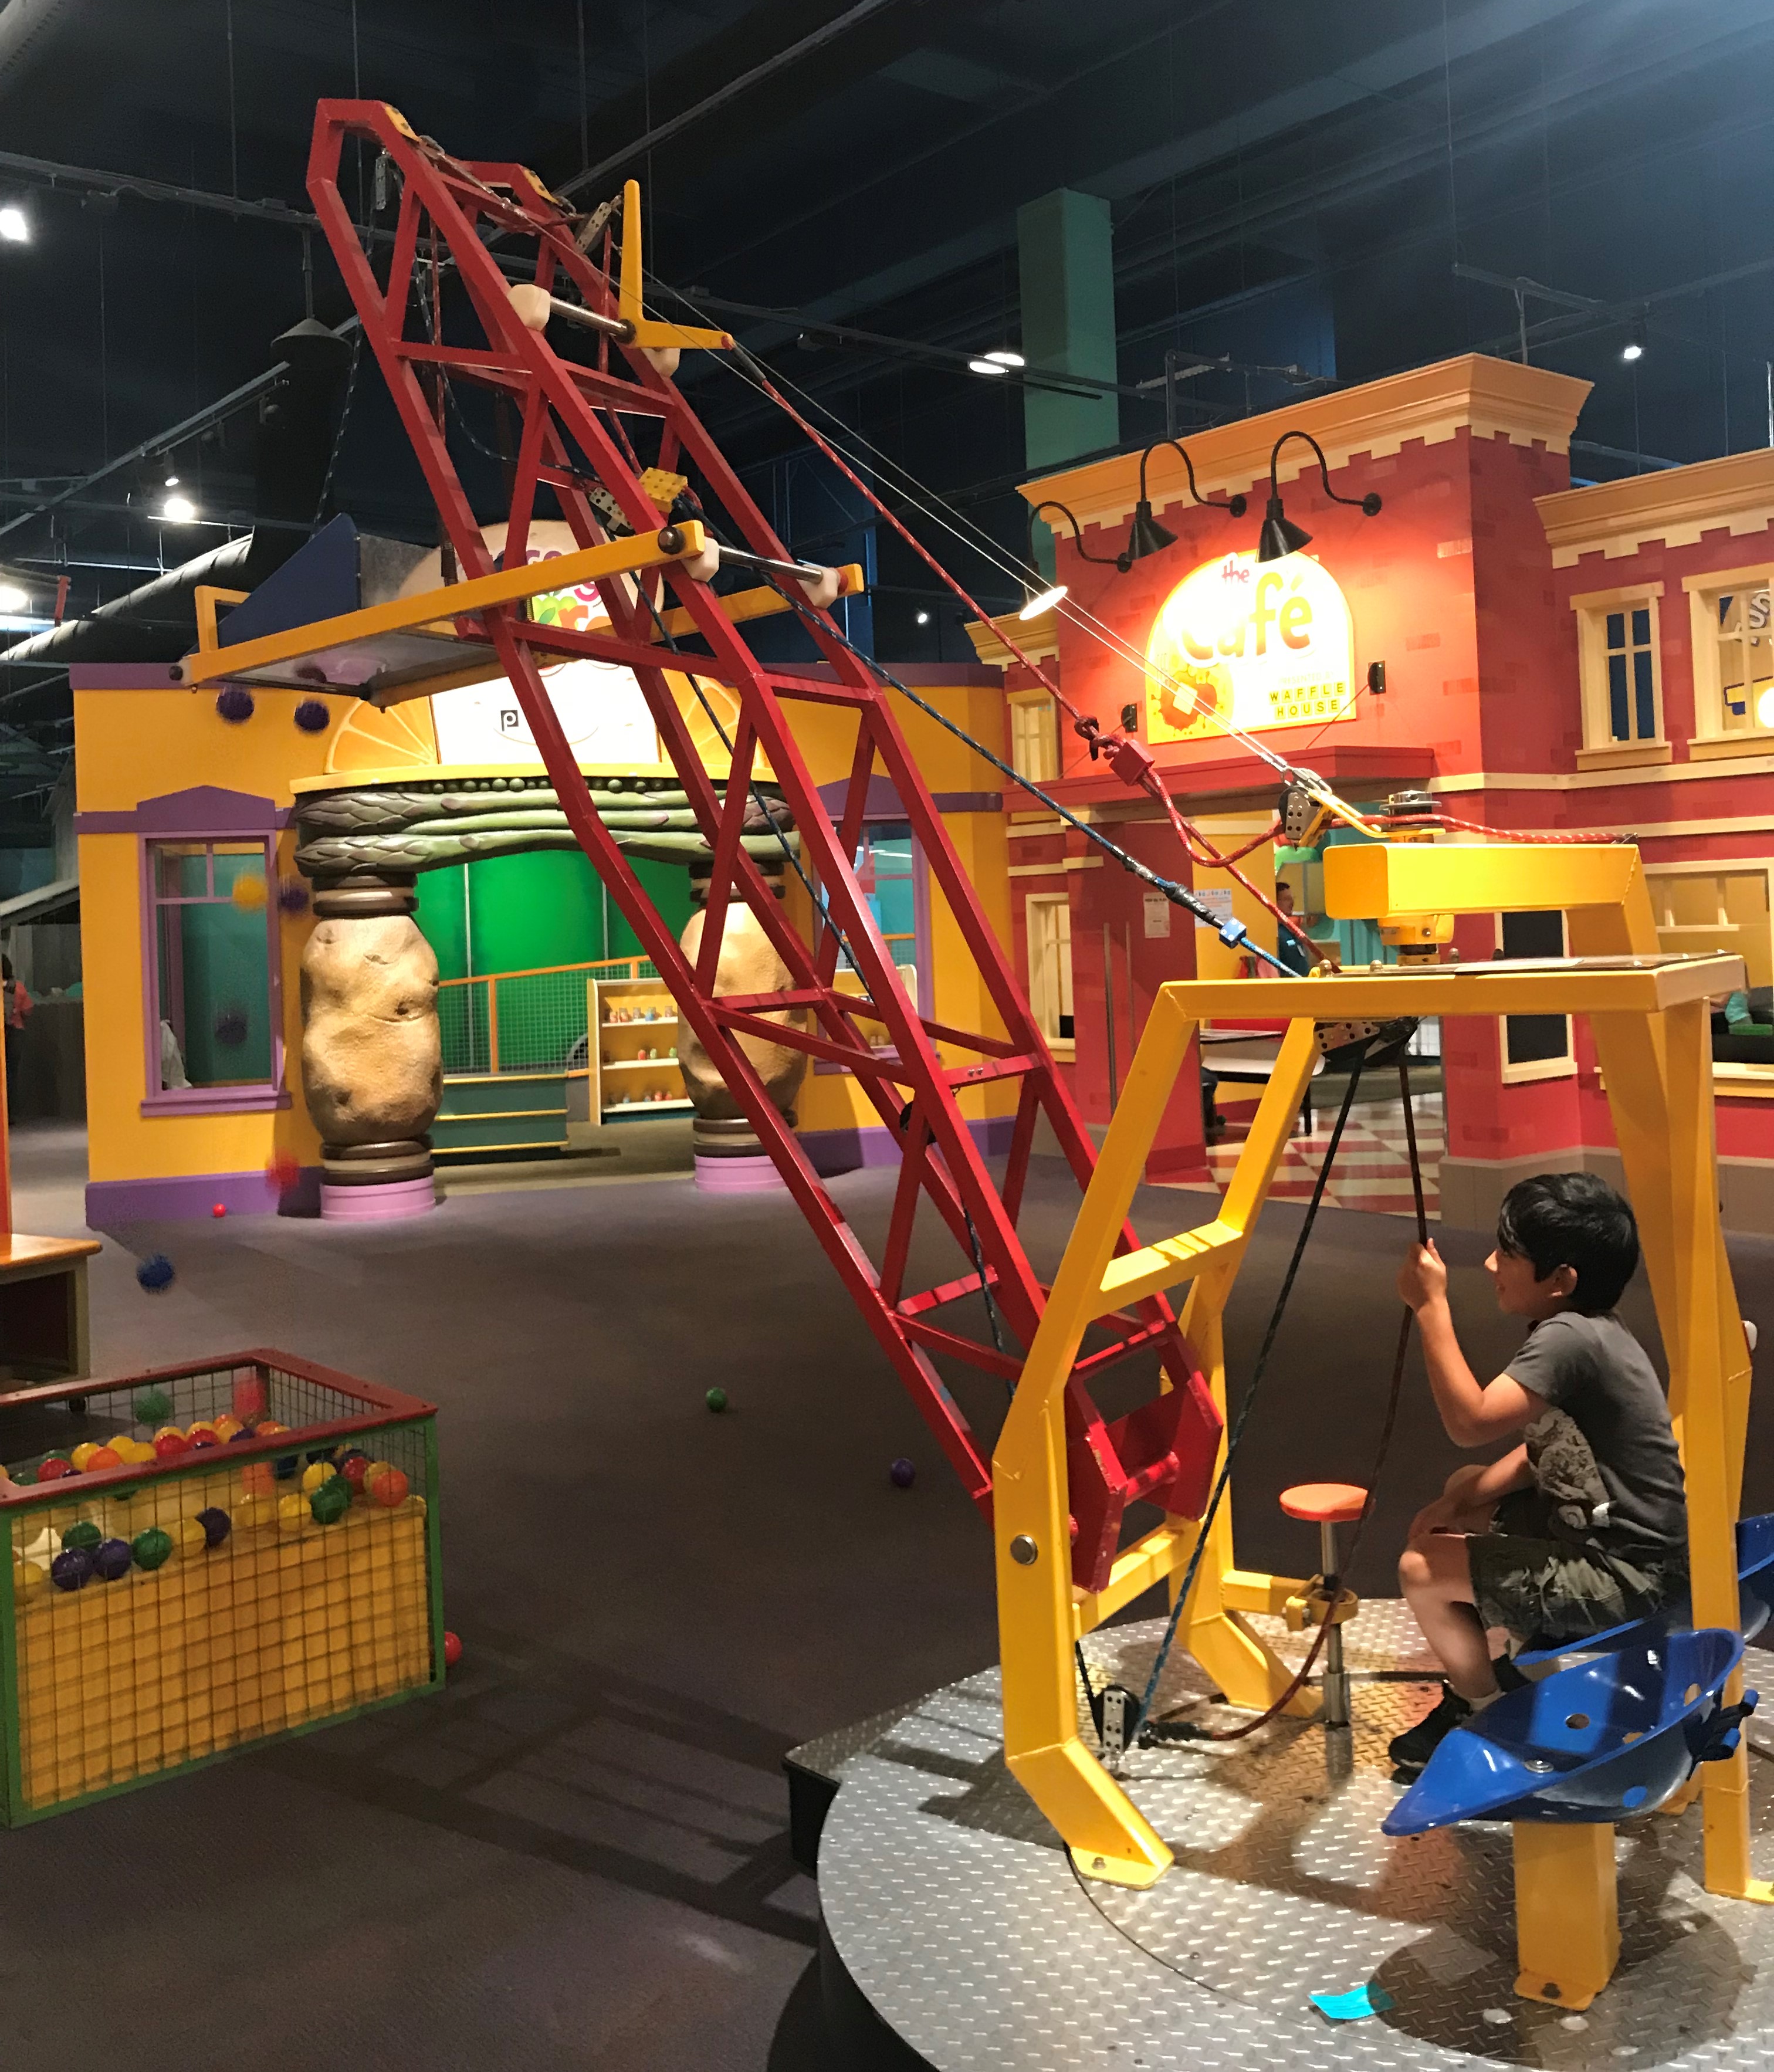 Collection 97+ Pictures Pictures Of The Children's Museum Full HD, 2k, 4k